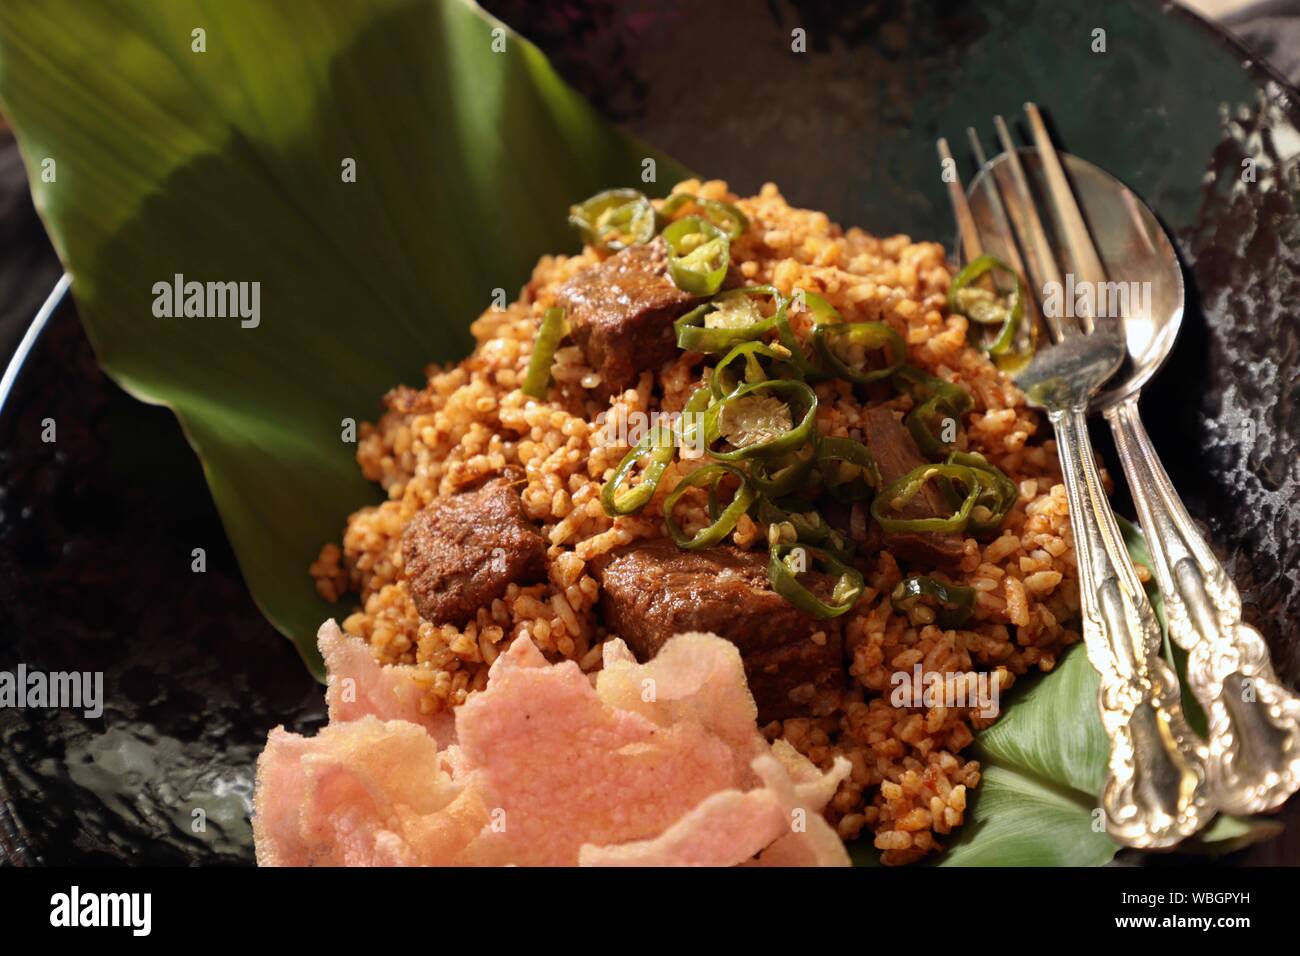 Nasi Goreng Rendang. Indonesian fried rice with Beef Rendang and its spice mix Stock Photo